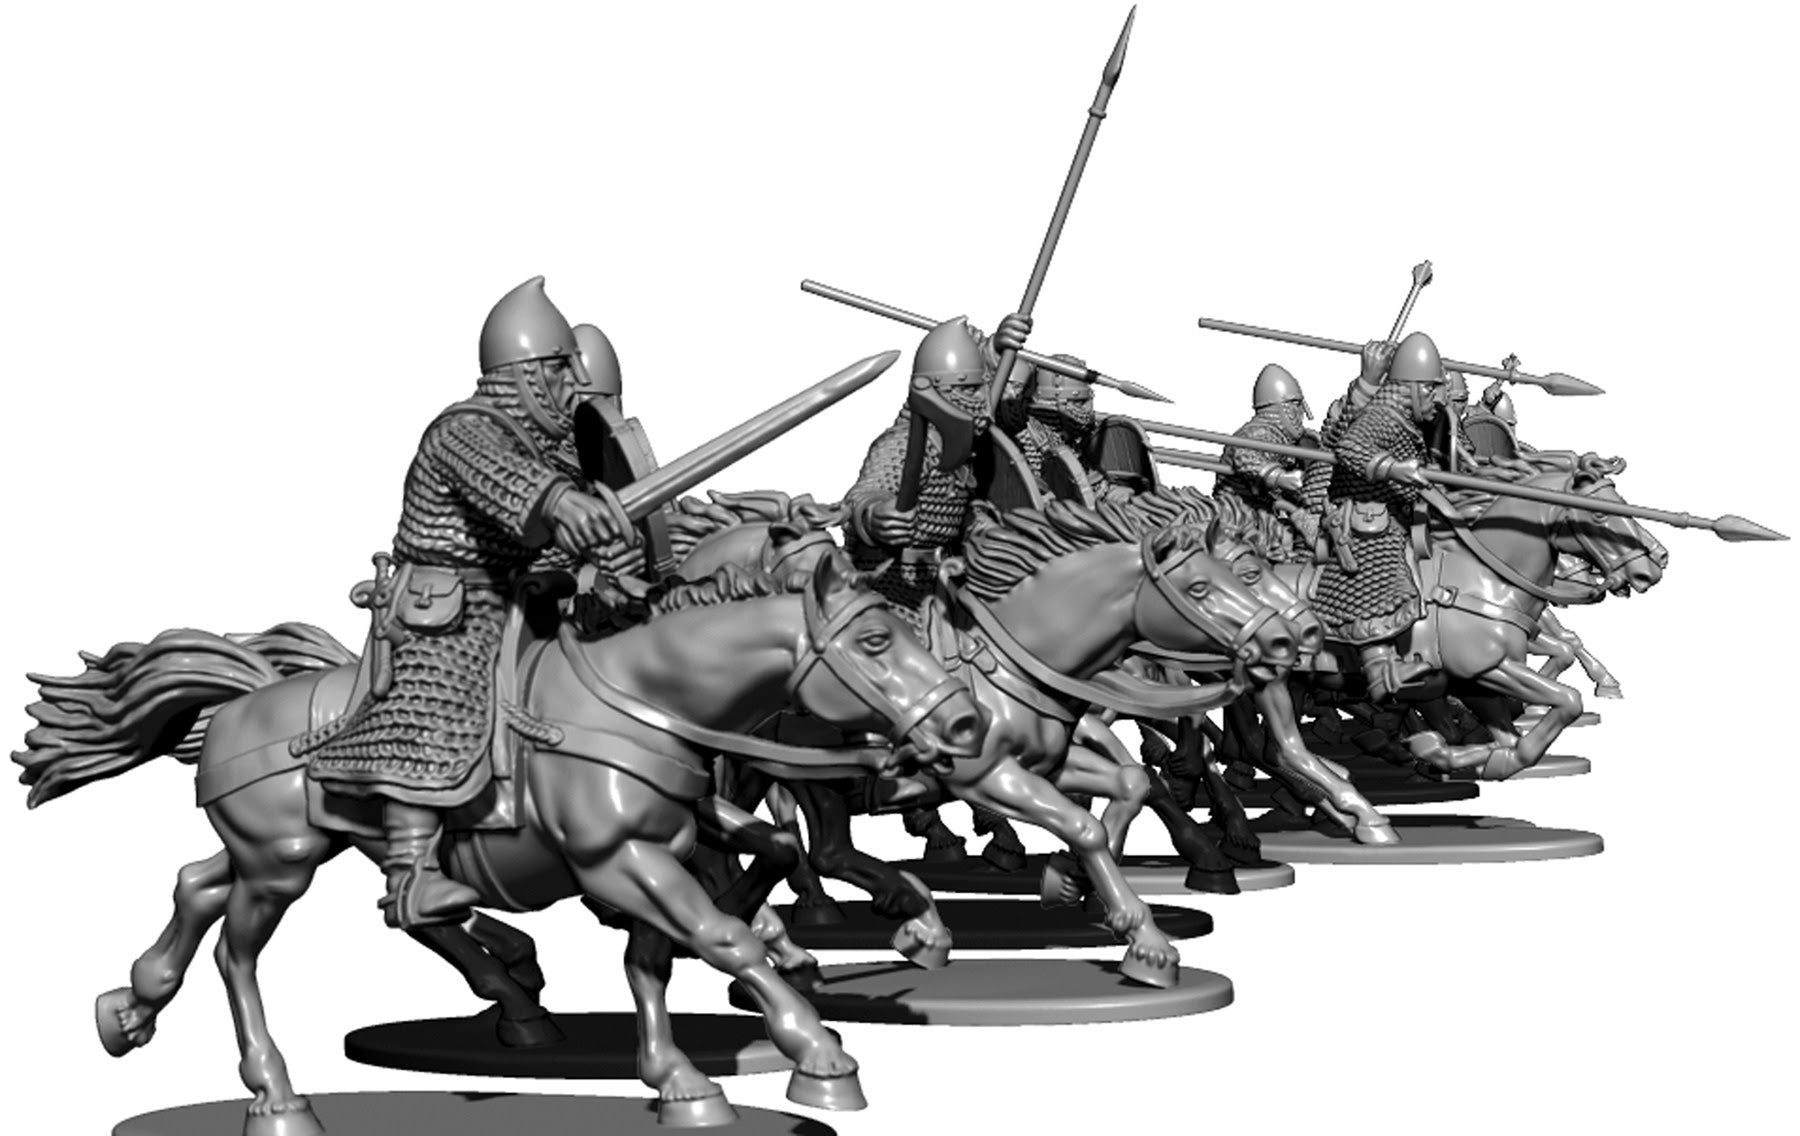 Upcoming Release: Norman Cavalry